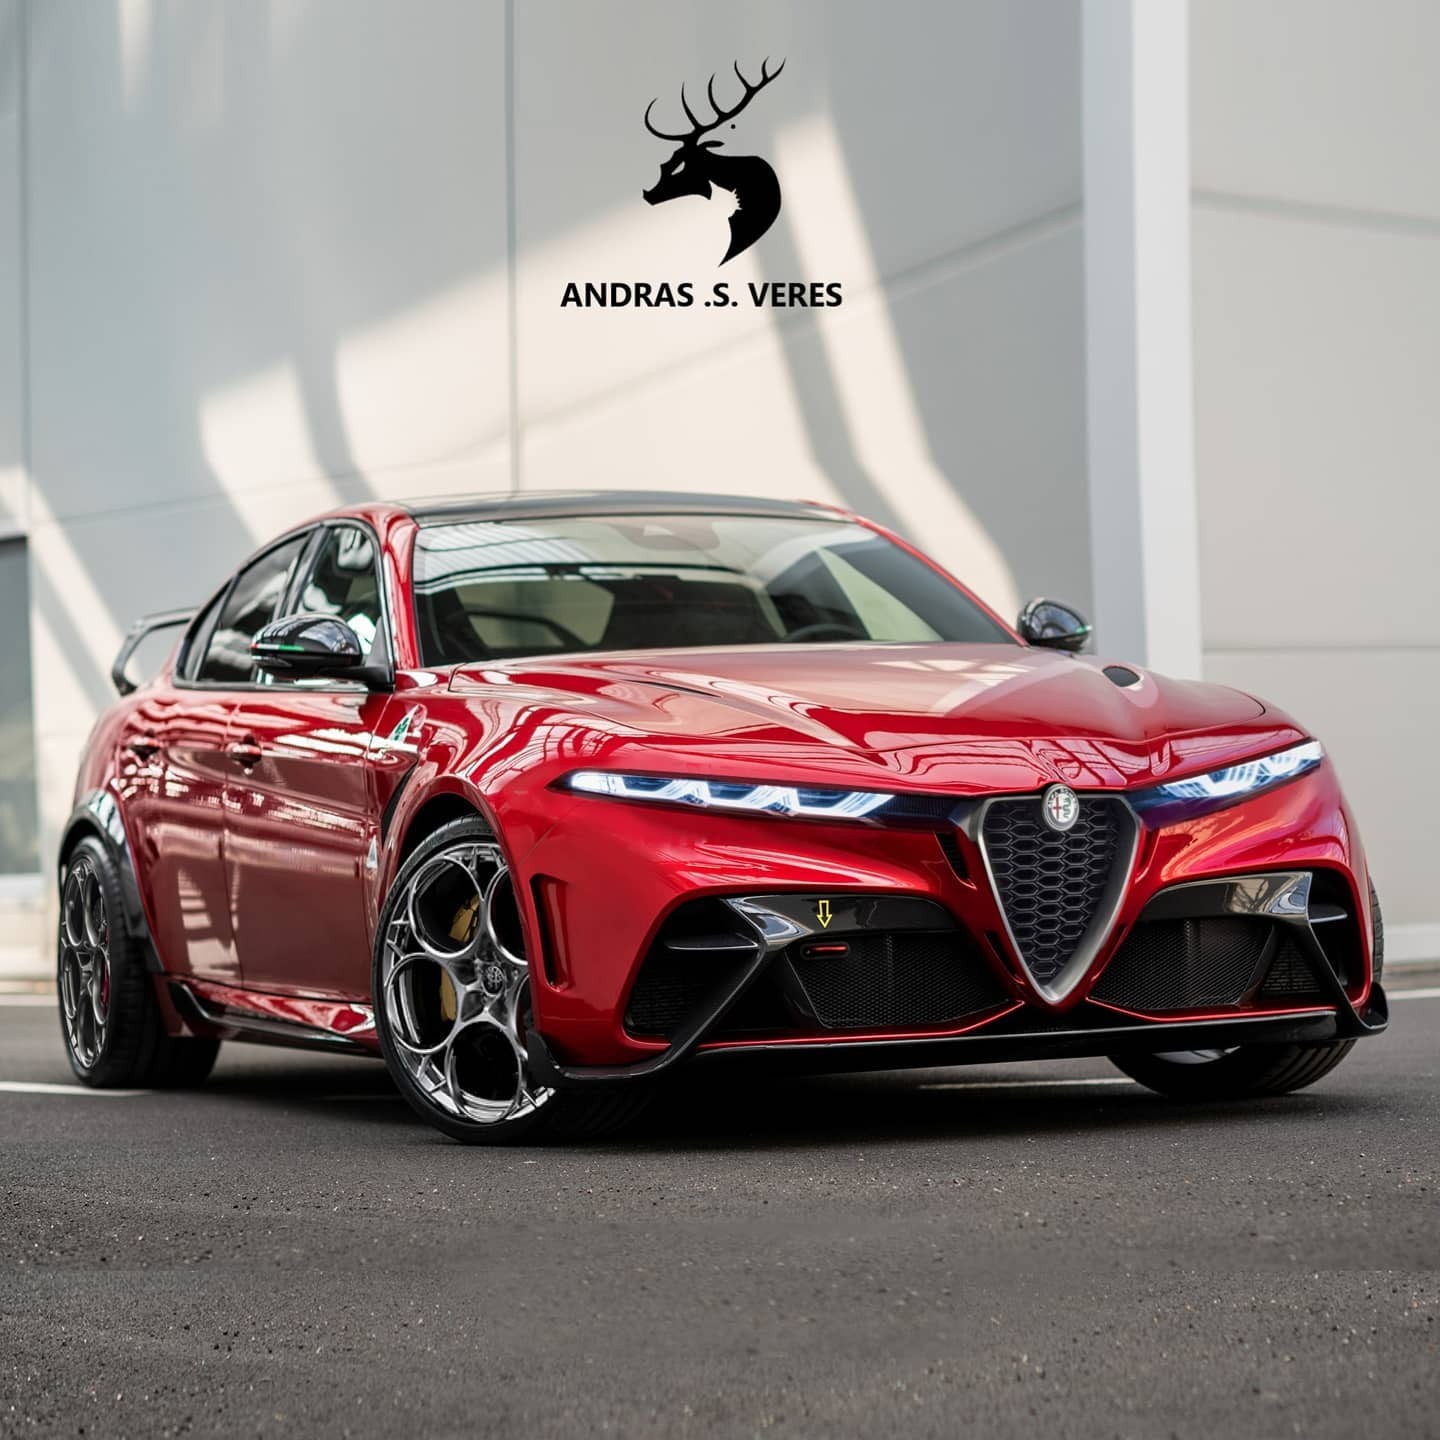 2024 Alfa Romeo Giulia Gtam Unofficially Previewed Now Say Che Bella Macchina With Us 1 